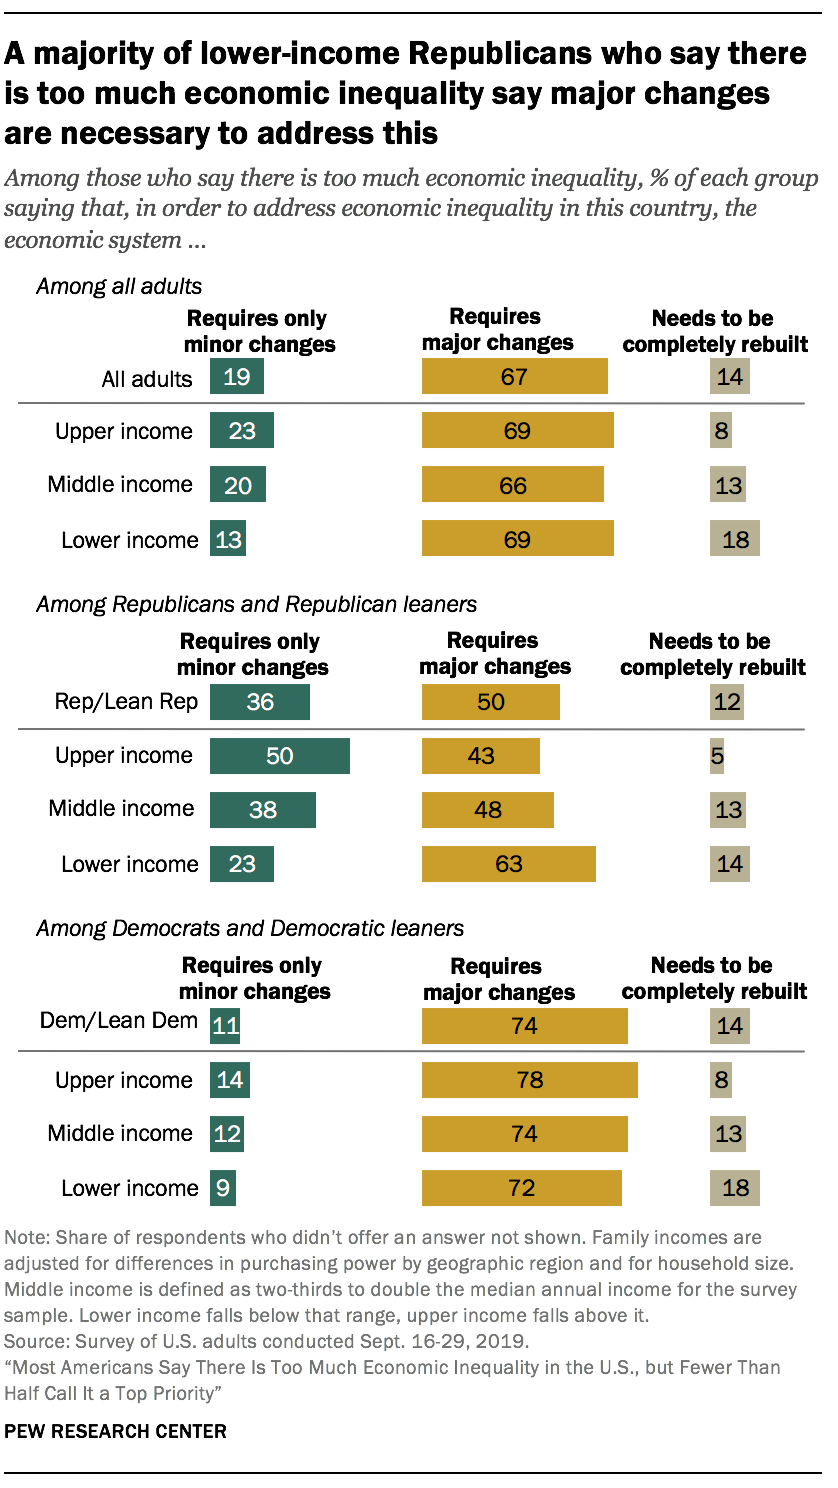 A majority of lower-income Republicans who say there is too much economic inequality say major changes are necessary to address this 